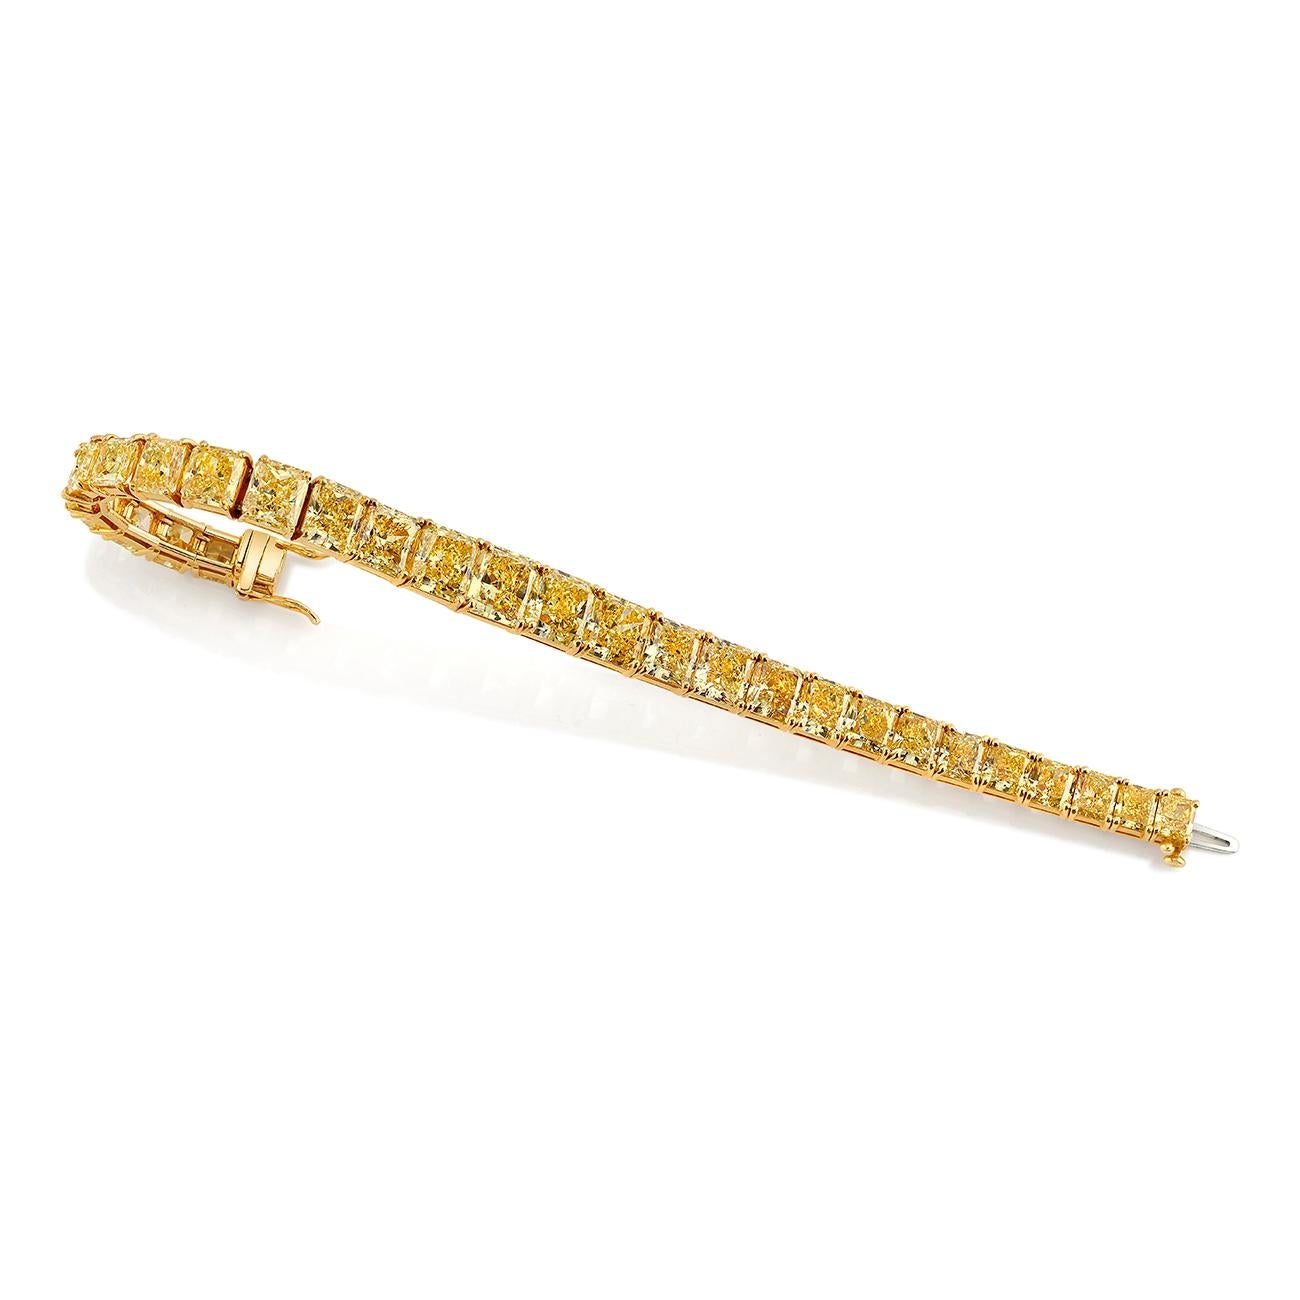 18K Yellow Gold 

GIA 45.05ctw (29) Fancy Yellow-Fancy Intense Yellow VS1-SI Radiant Cut Diamond Line Bracelet

Originally featured on the cover of the 1995 Neiman Marcus Holiday Book
Includes GIA Certificate and a photo copy of the 1995 Neiman